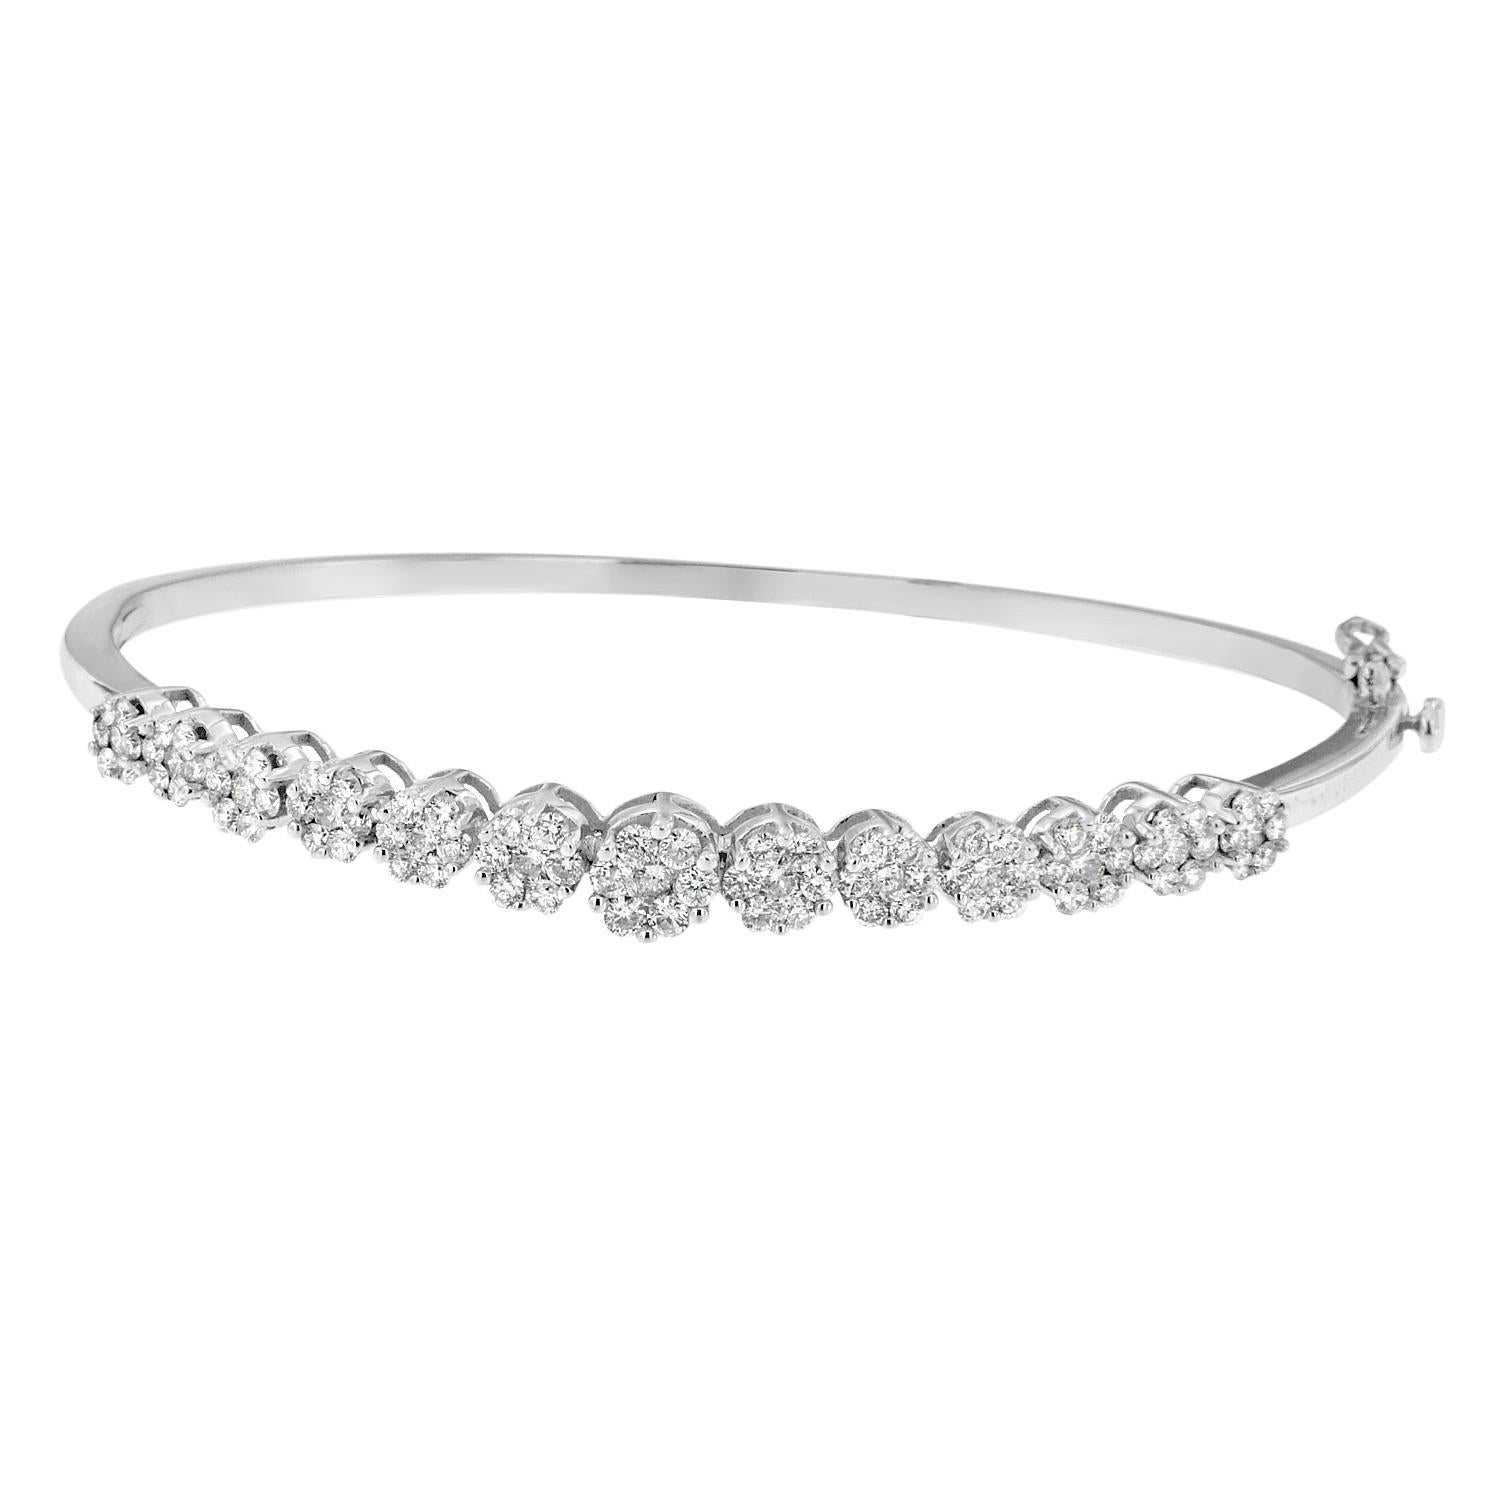 Give her a flair for floral with this simple yet stunning bracelet. Classic round cut diamonds create beautiful 